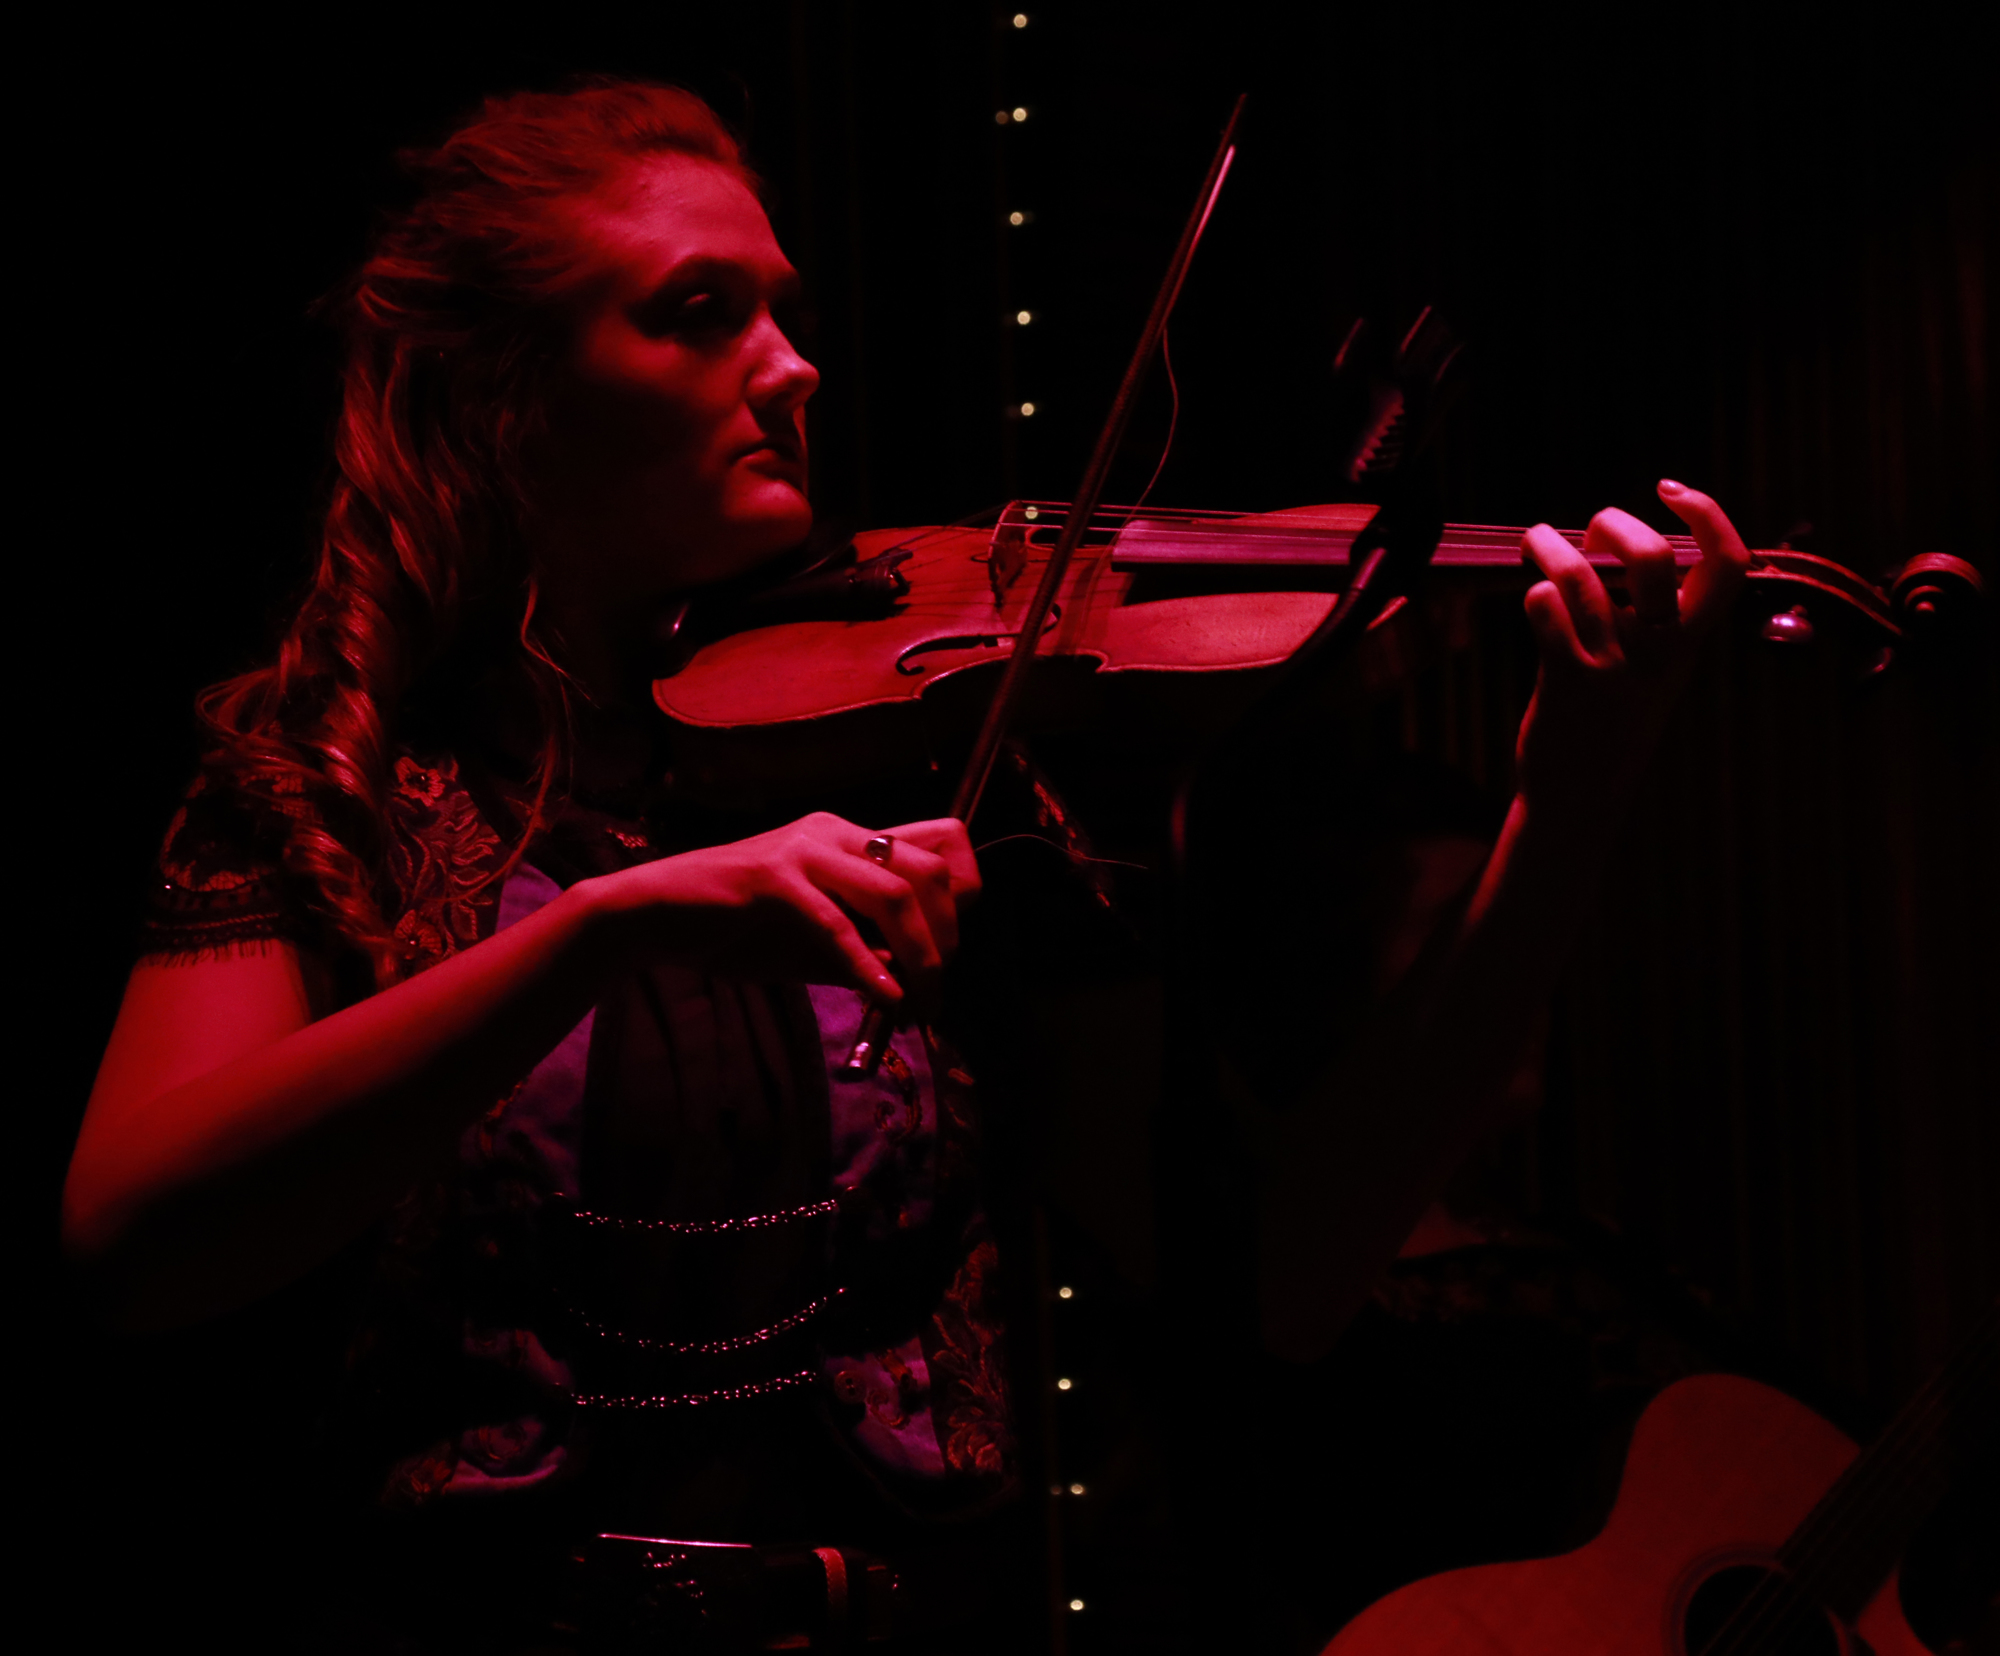 Cat Patterson plays a mean fiddle in 